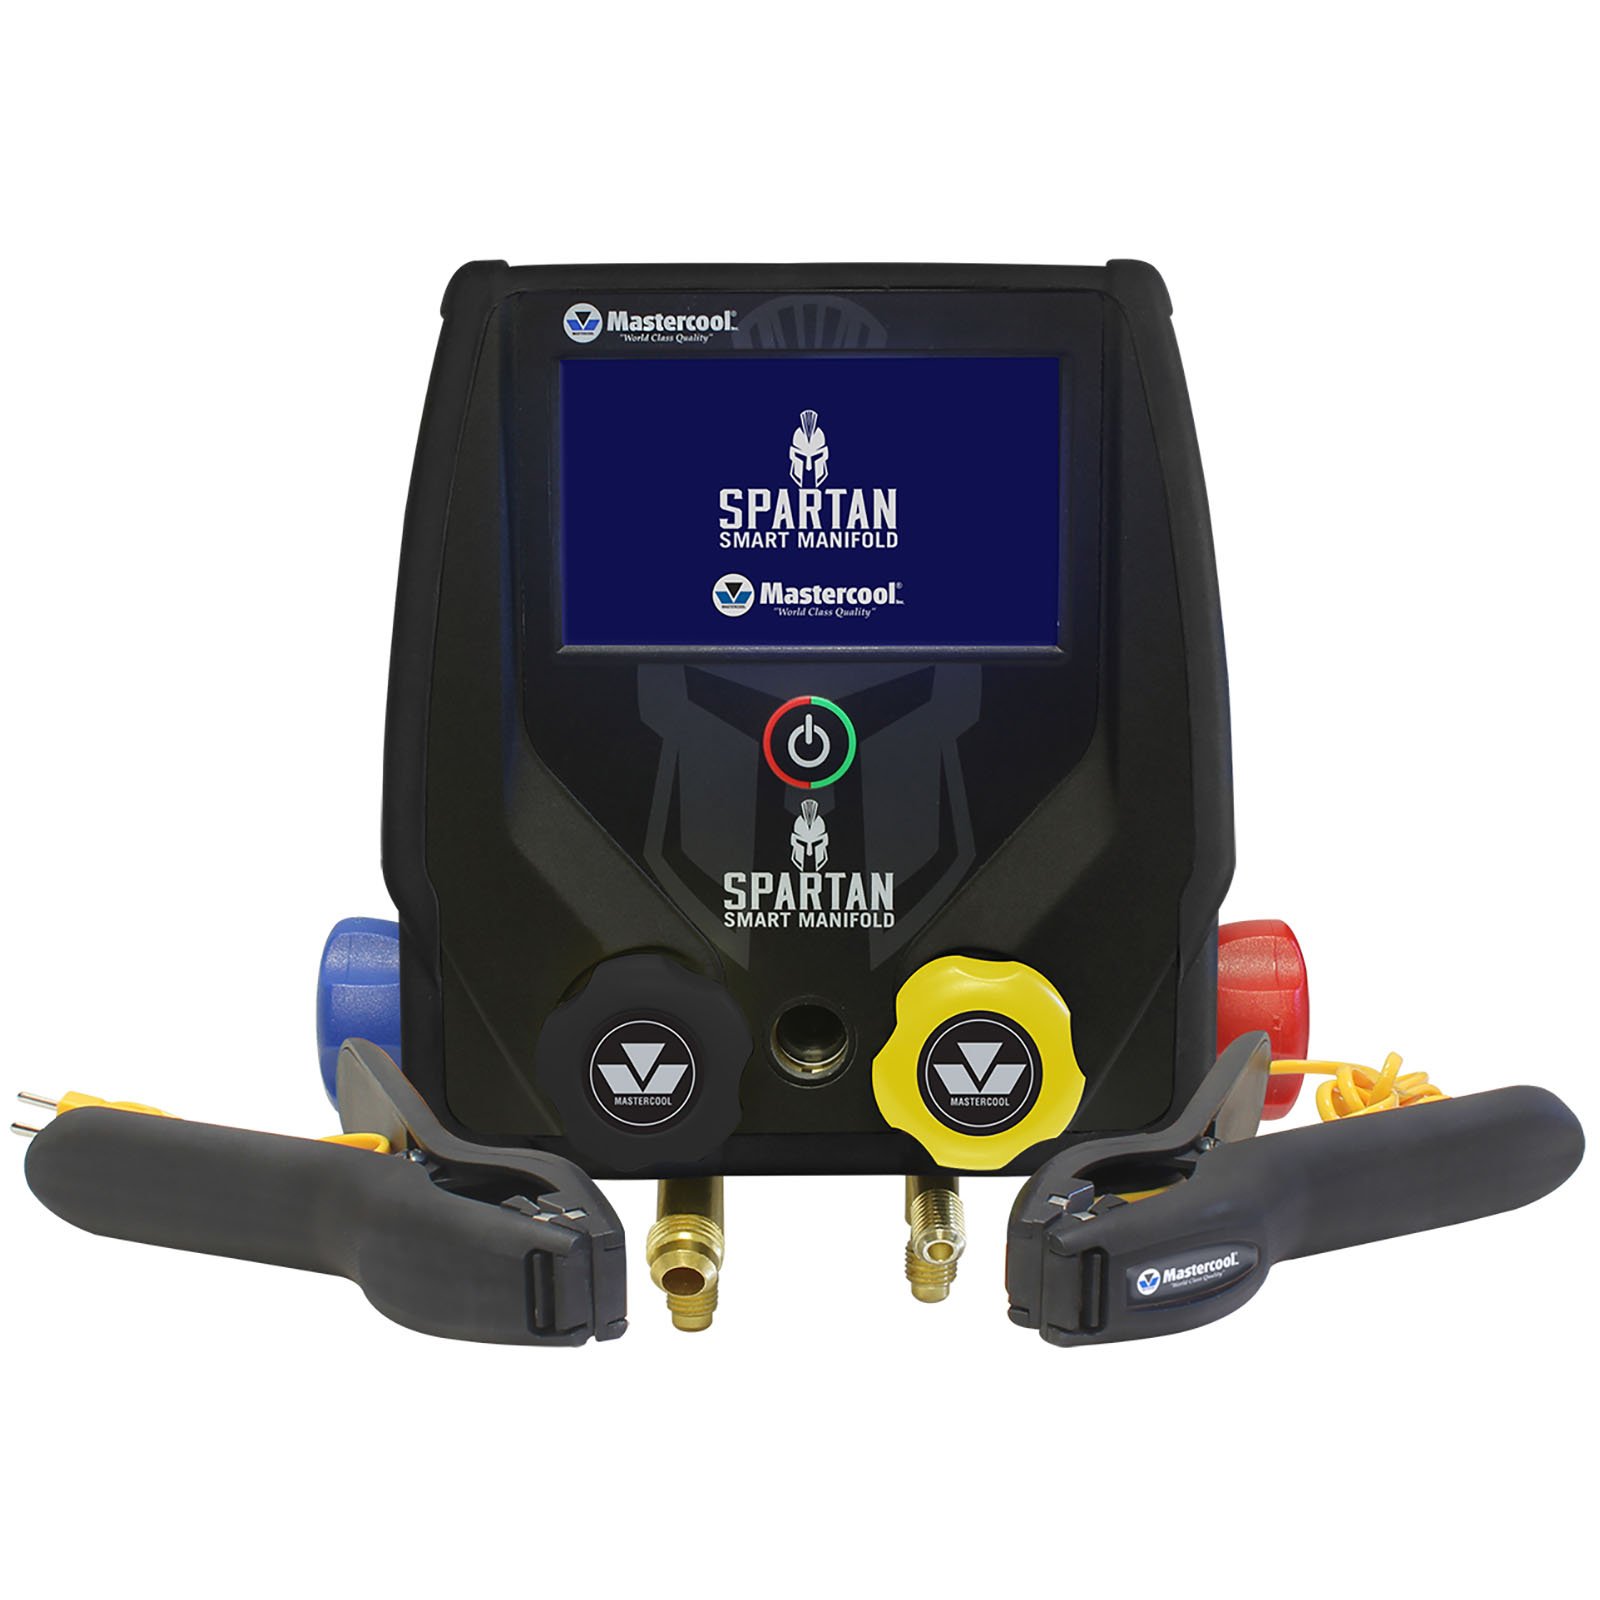 SPARTAN 4-way digital test fitting (suitable for A3 refrigerants)